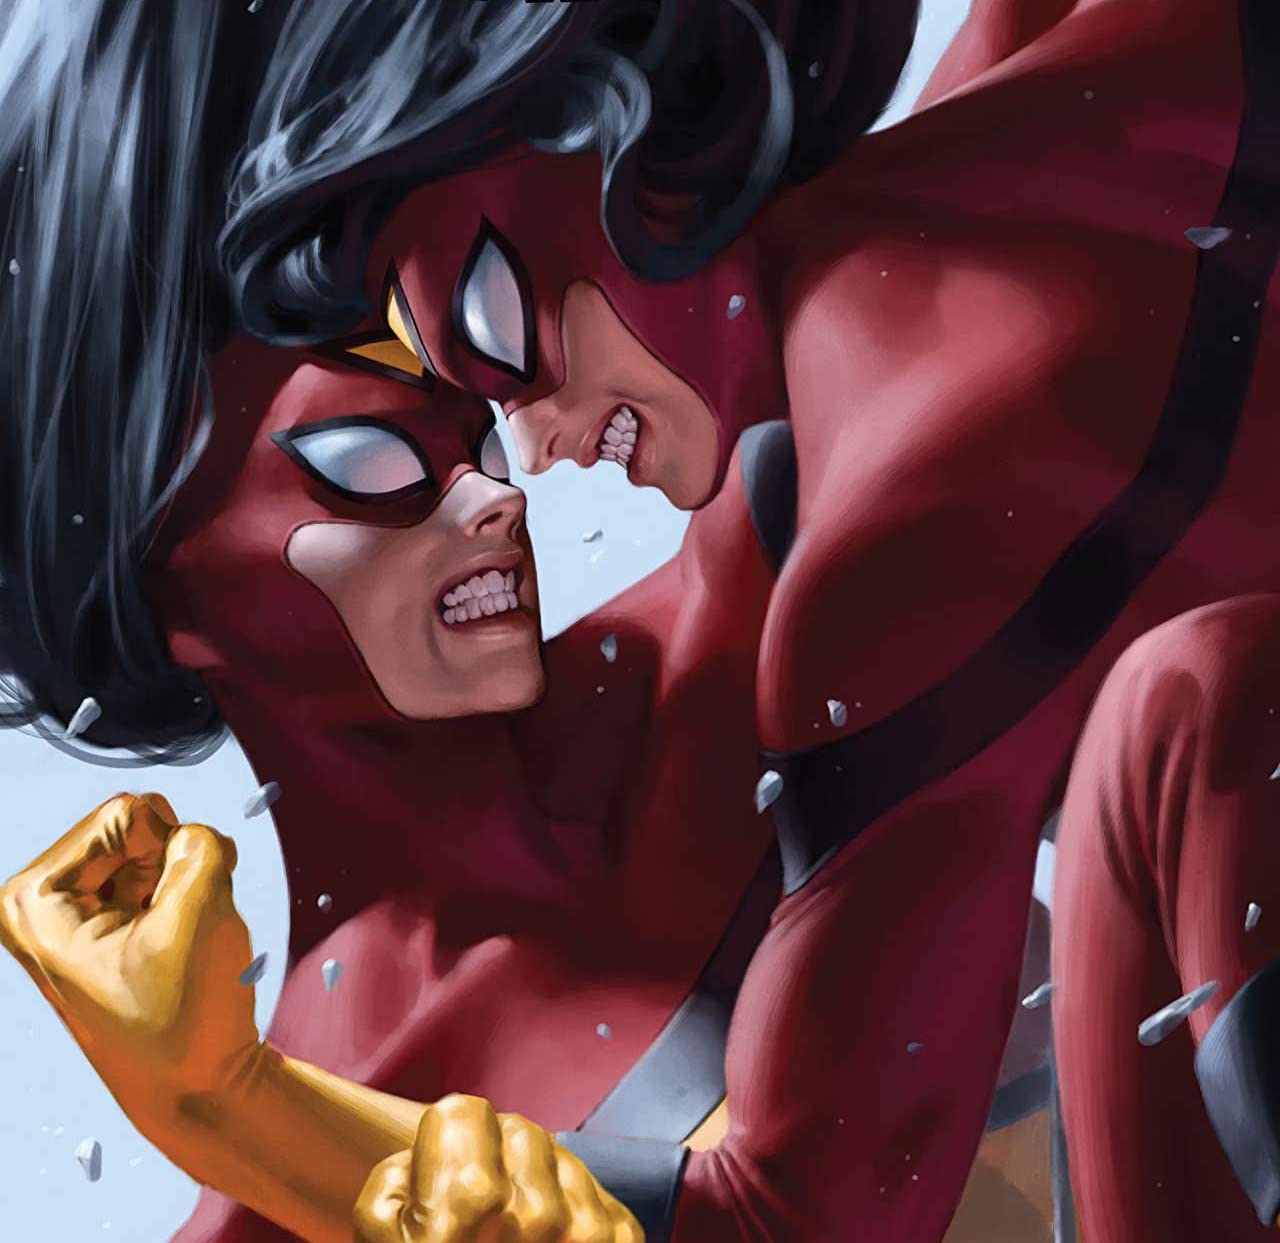 'Spider-Woman' #19 brings the pulse-pounding action